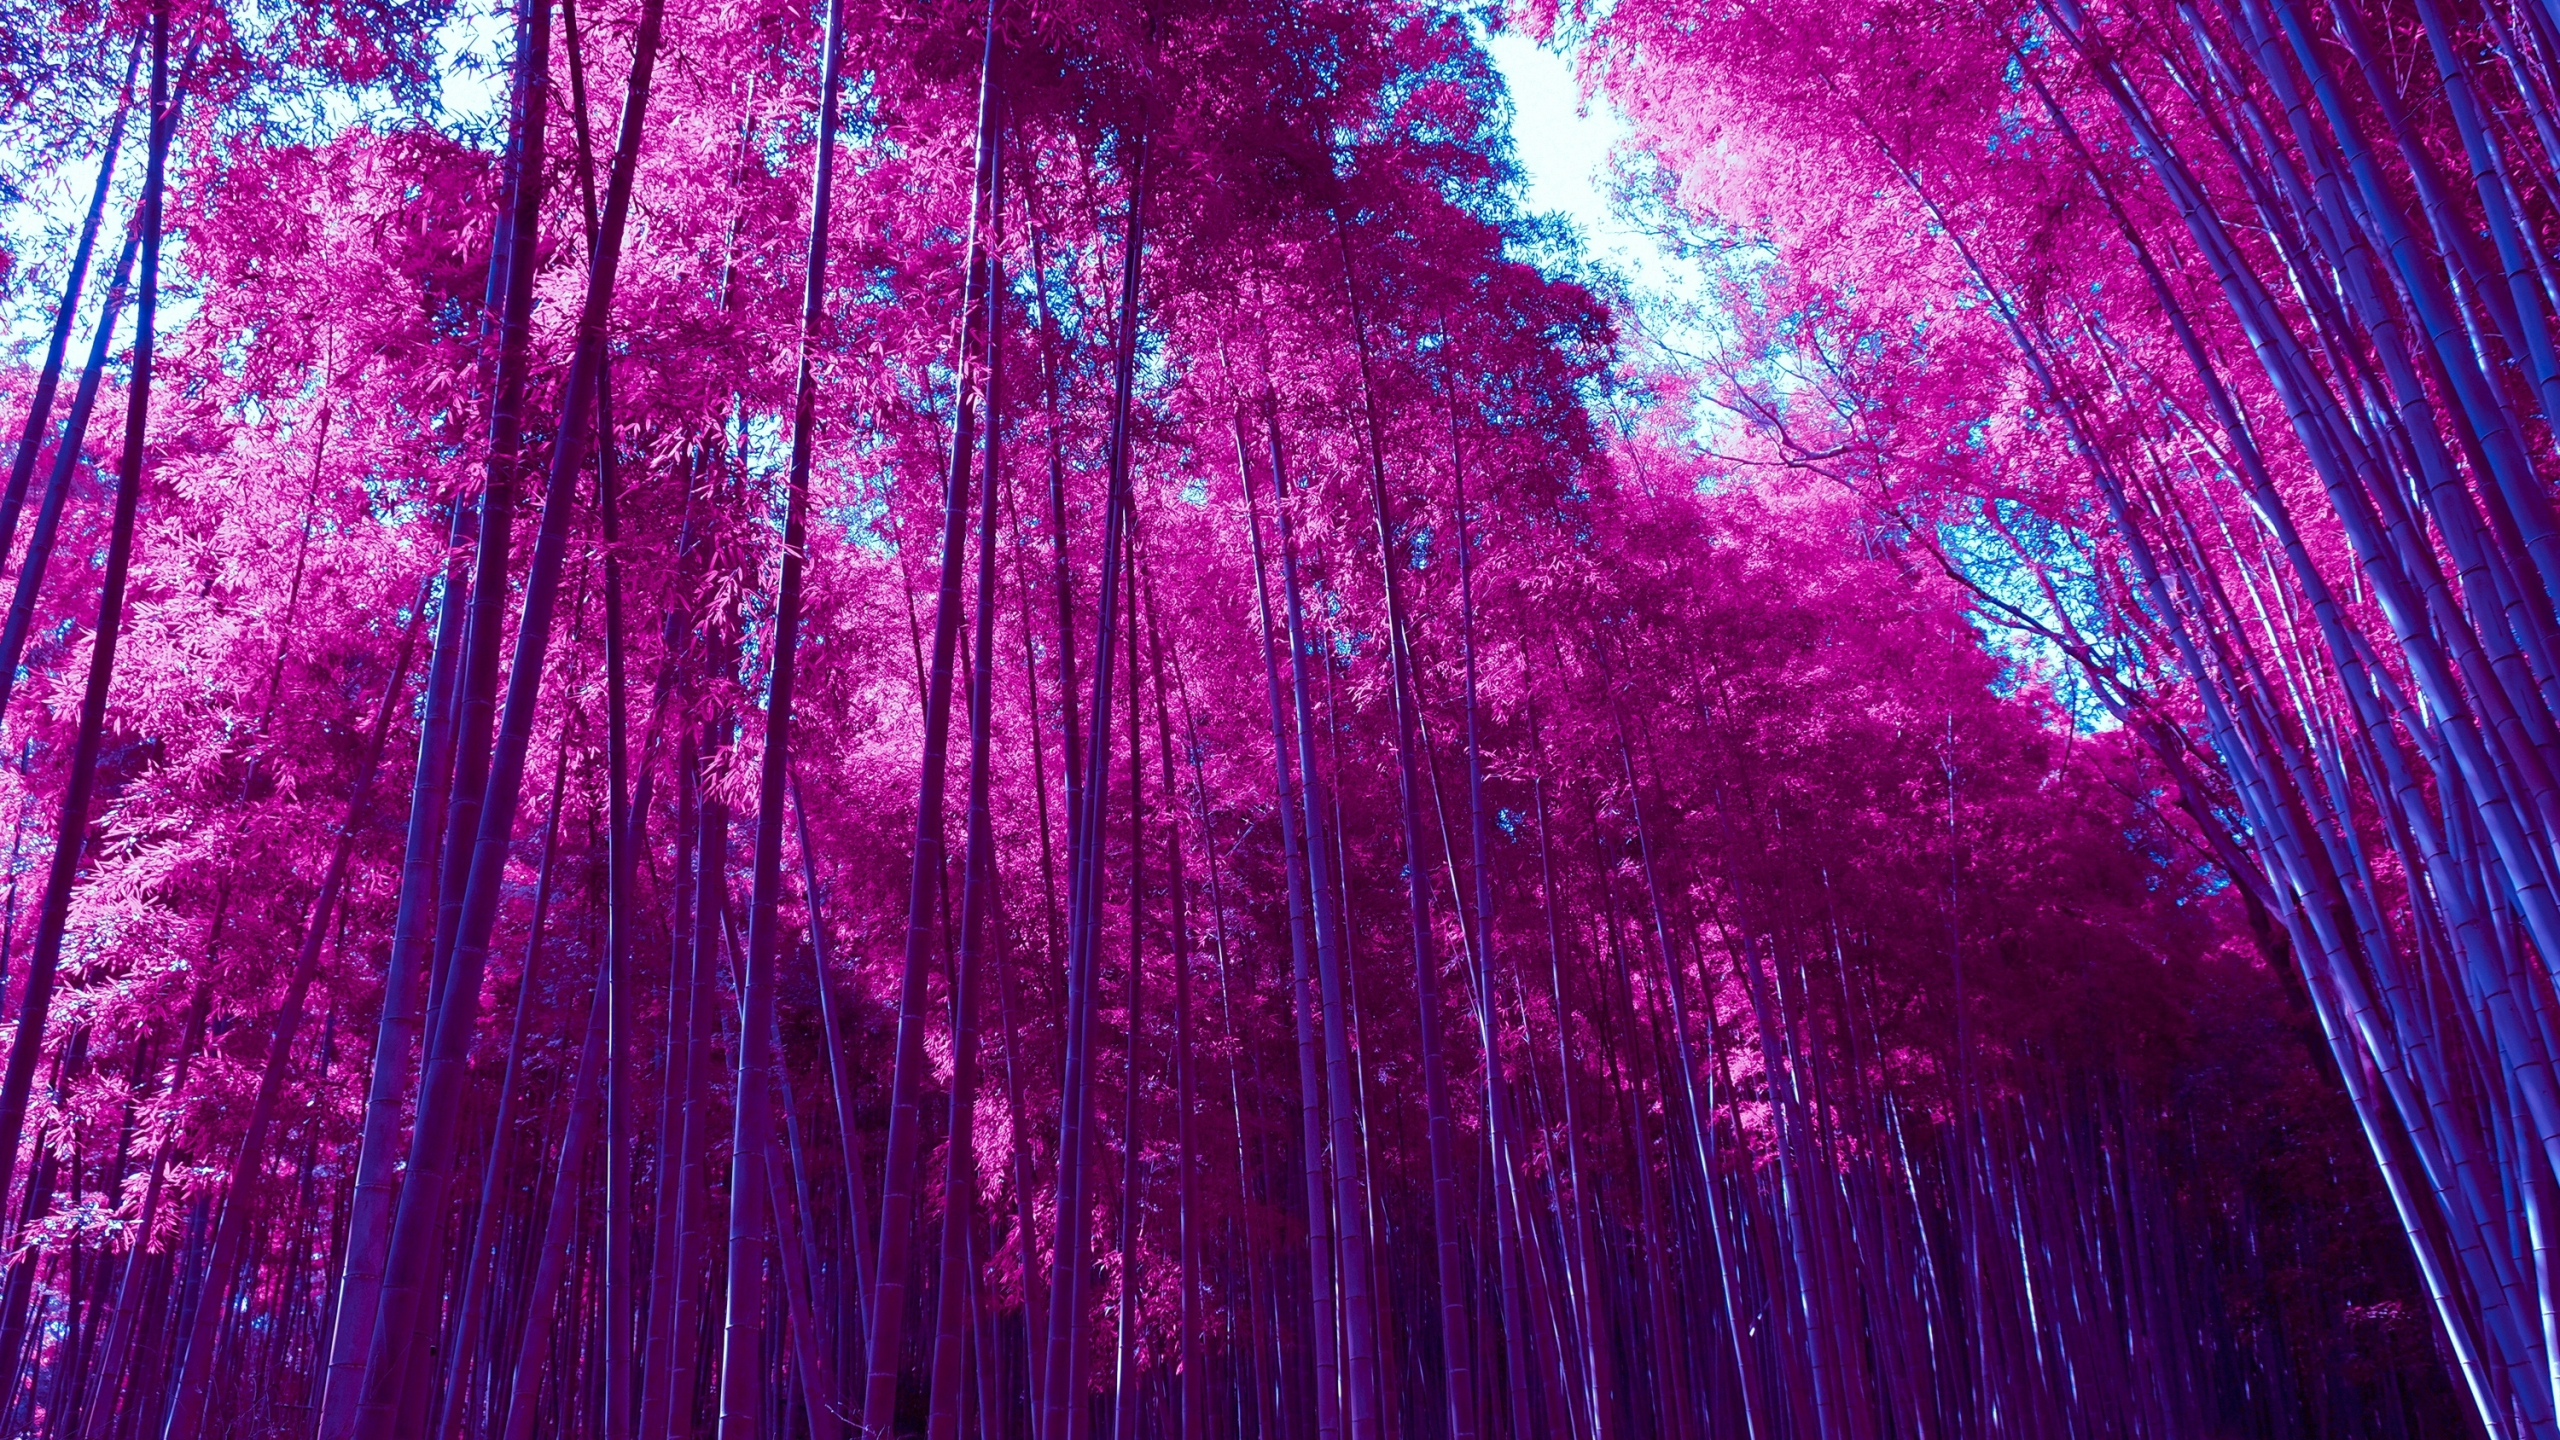 Download wallpaper 2560x1440 bamboo trees road fence dual wide 169  2560x1440 hd background 4322